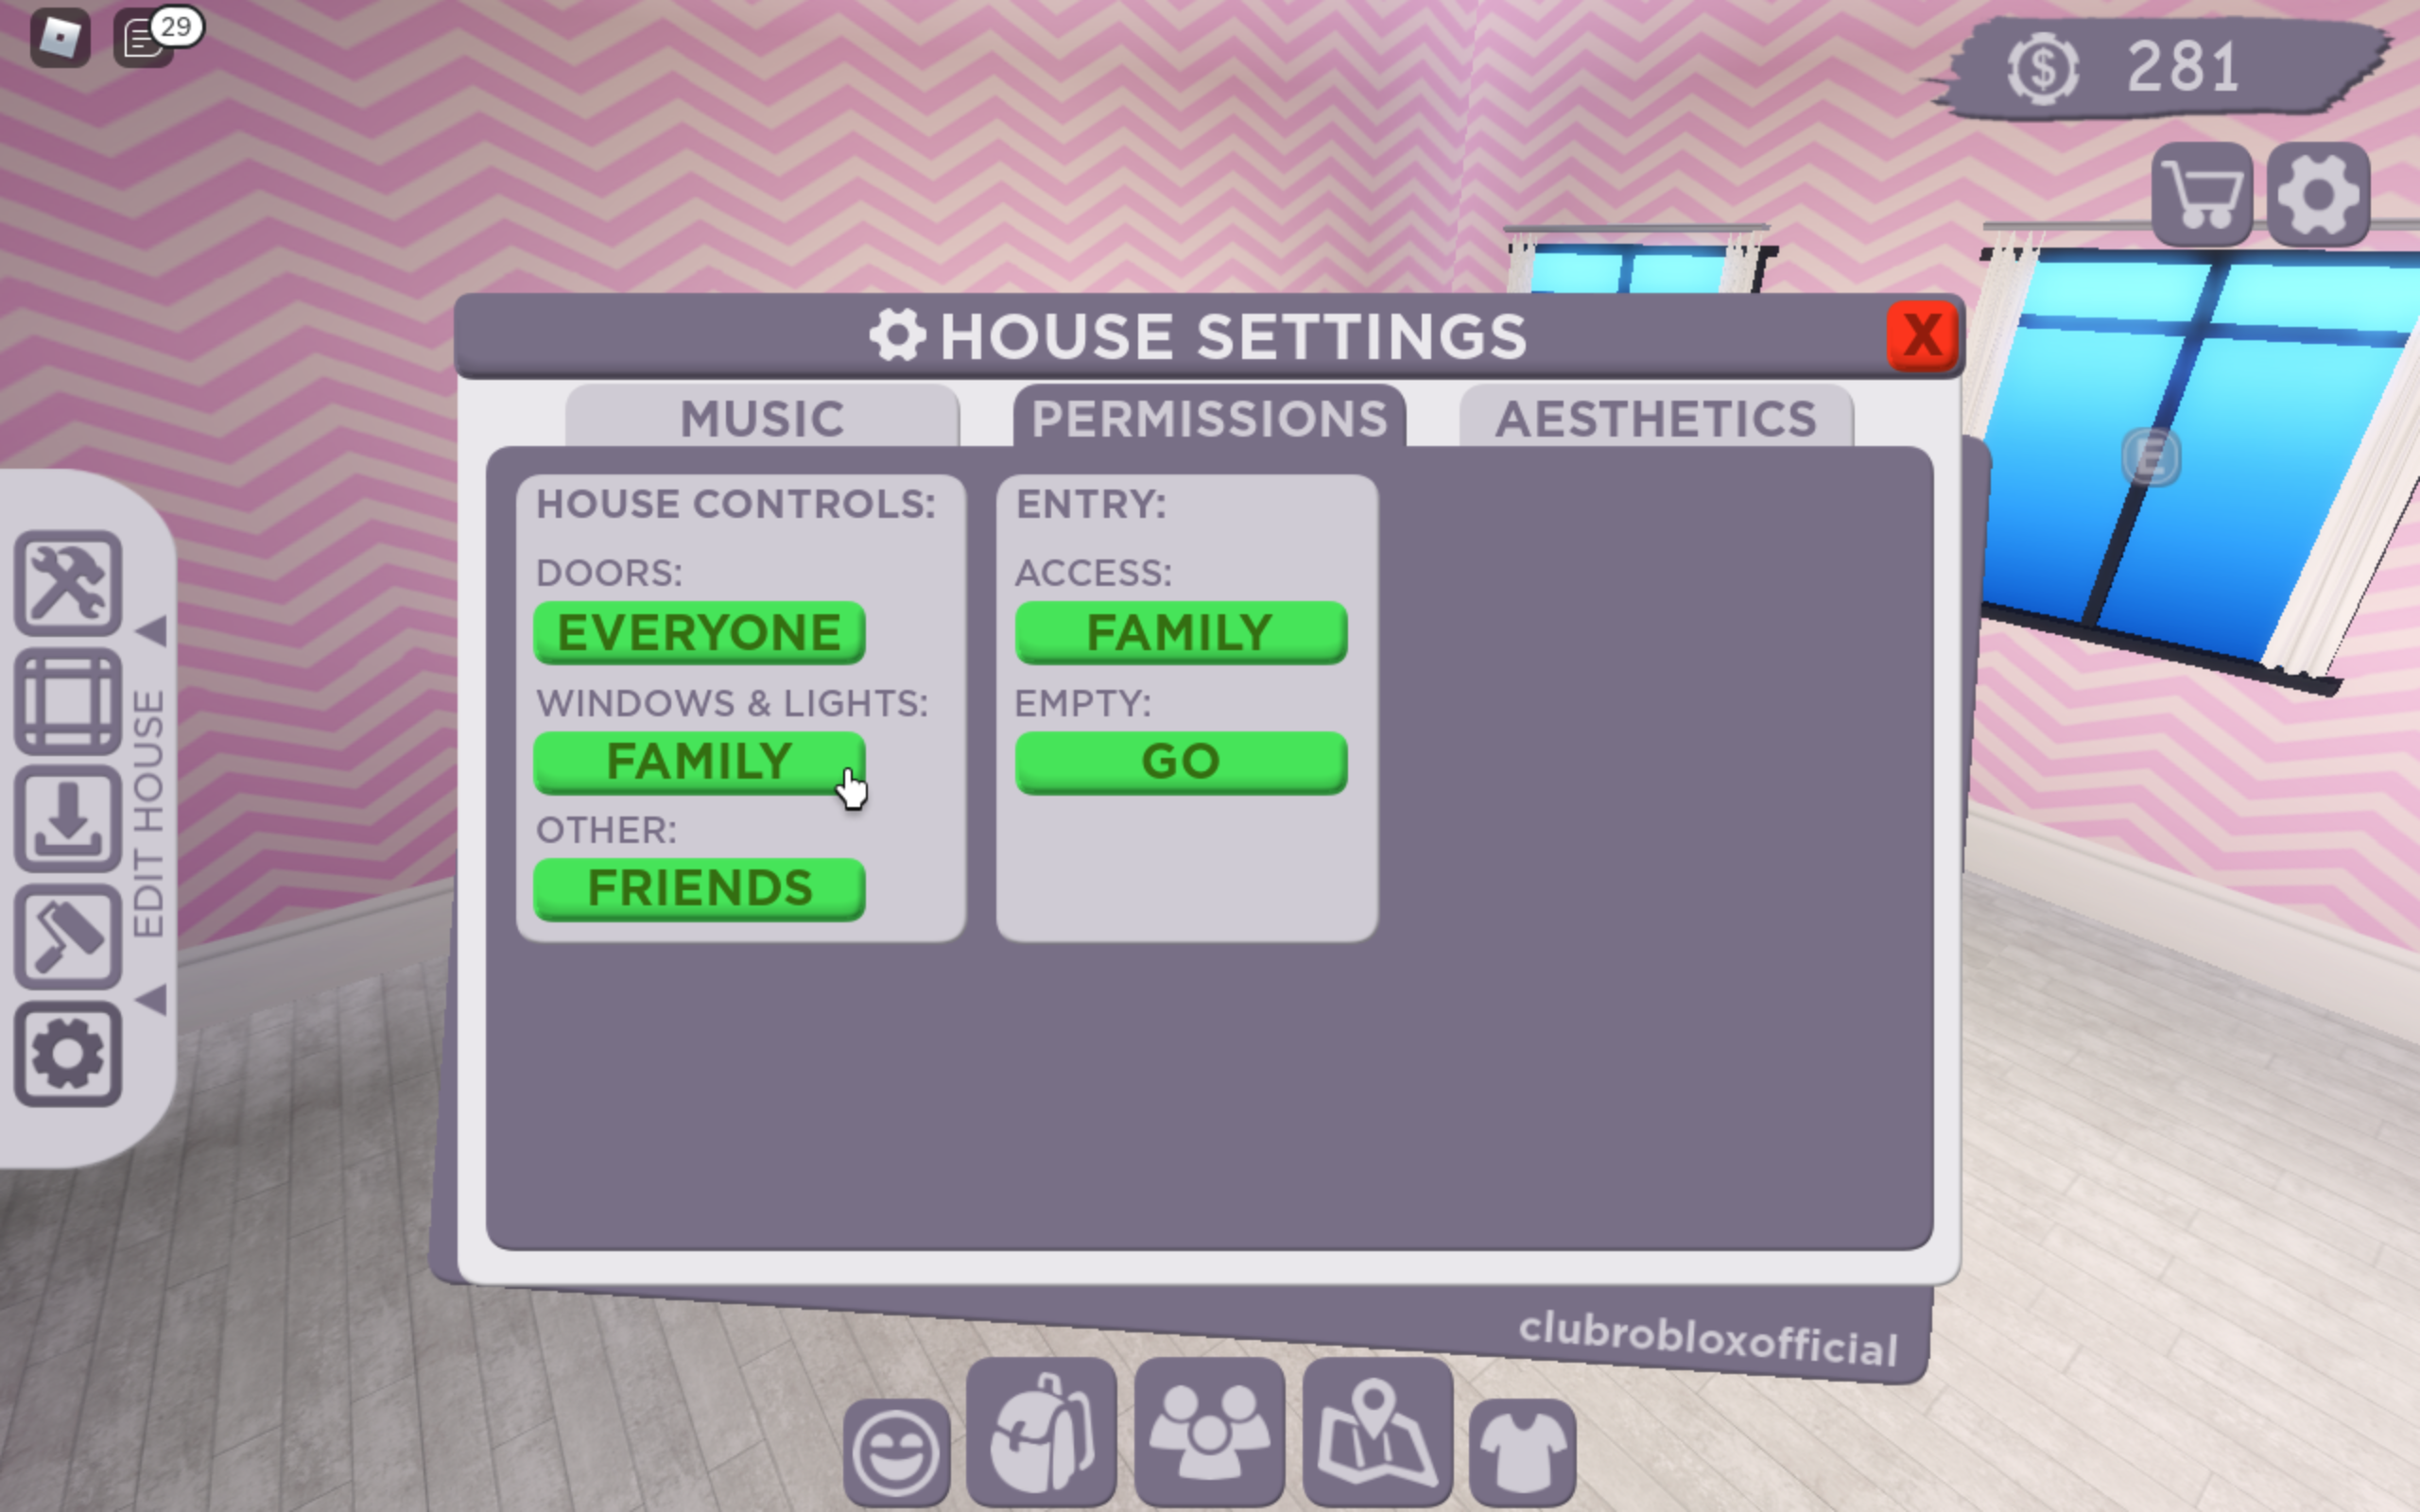 Why doesnt roblox let me save the settings while having only one player  sized server? : r/ROBLOXStudio